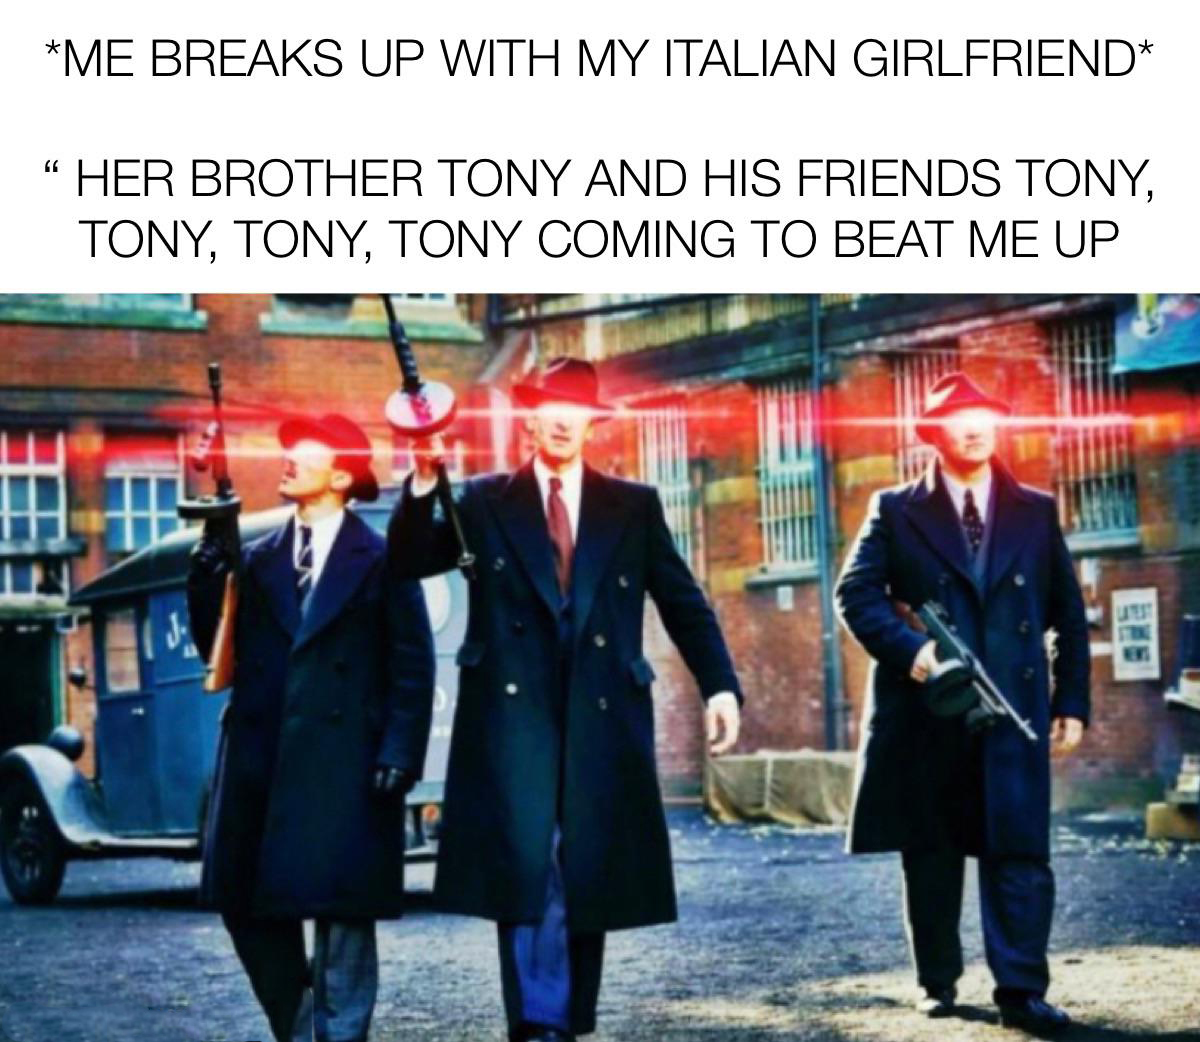 monday morning randomness - luca changretta - Me Breaks Up With My Italian Girlfriend "Her Brother Tony And His Friends Tony, Tony, Tony, Tony Coming To Beat Me Up atst